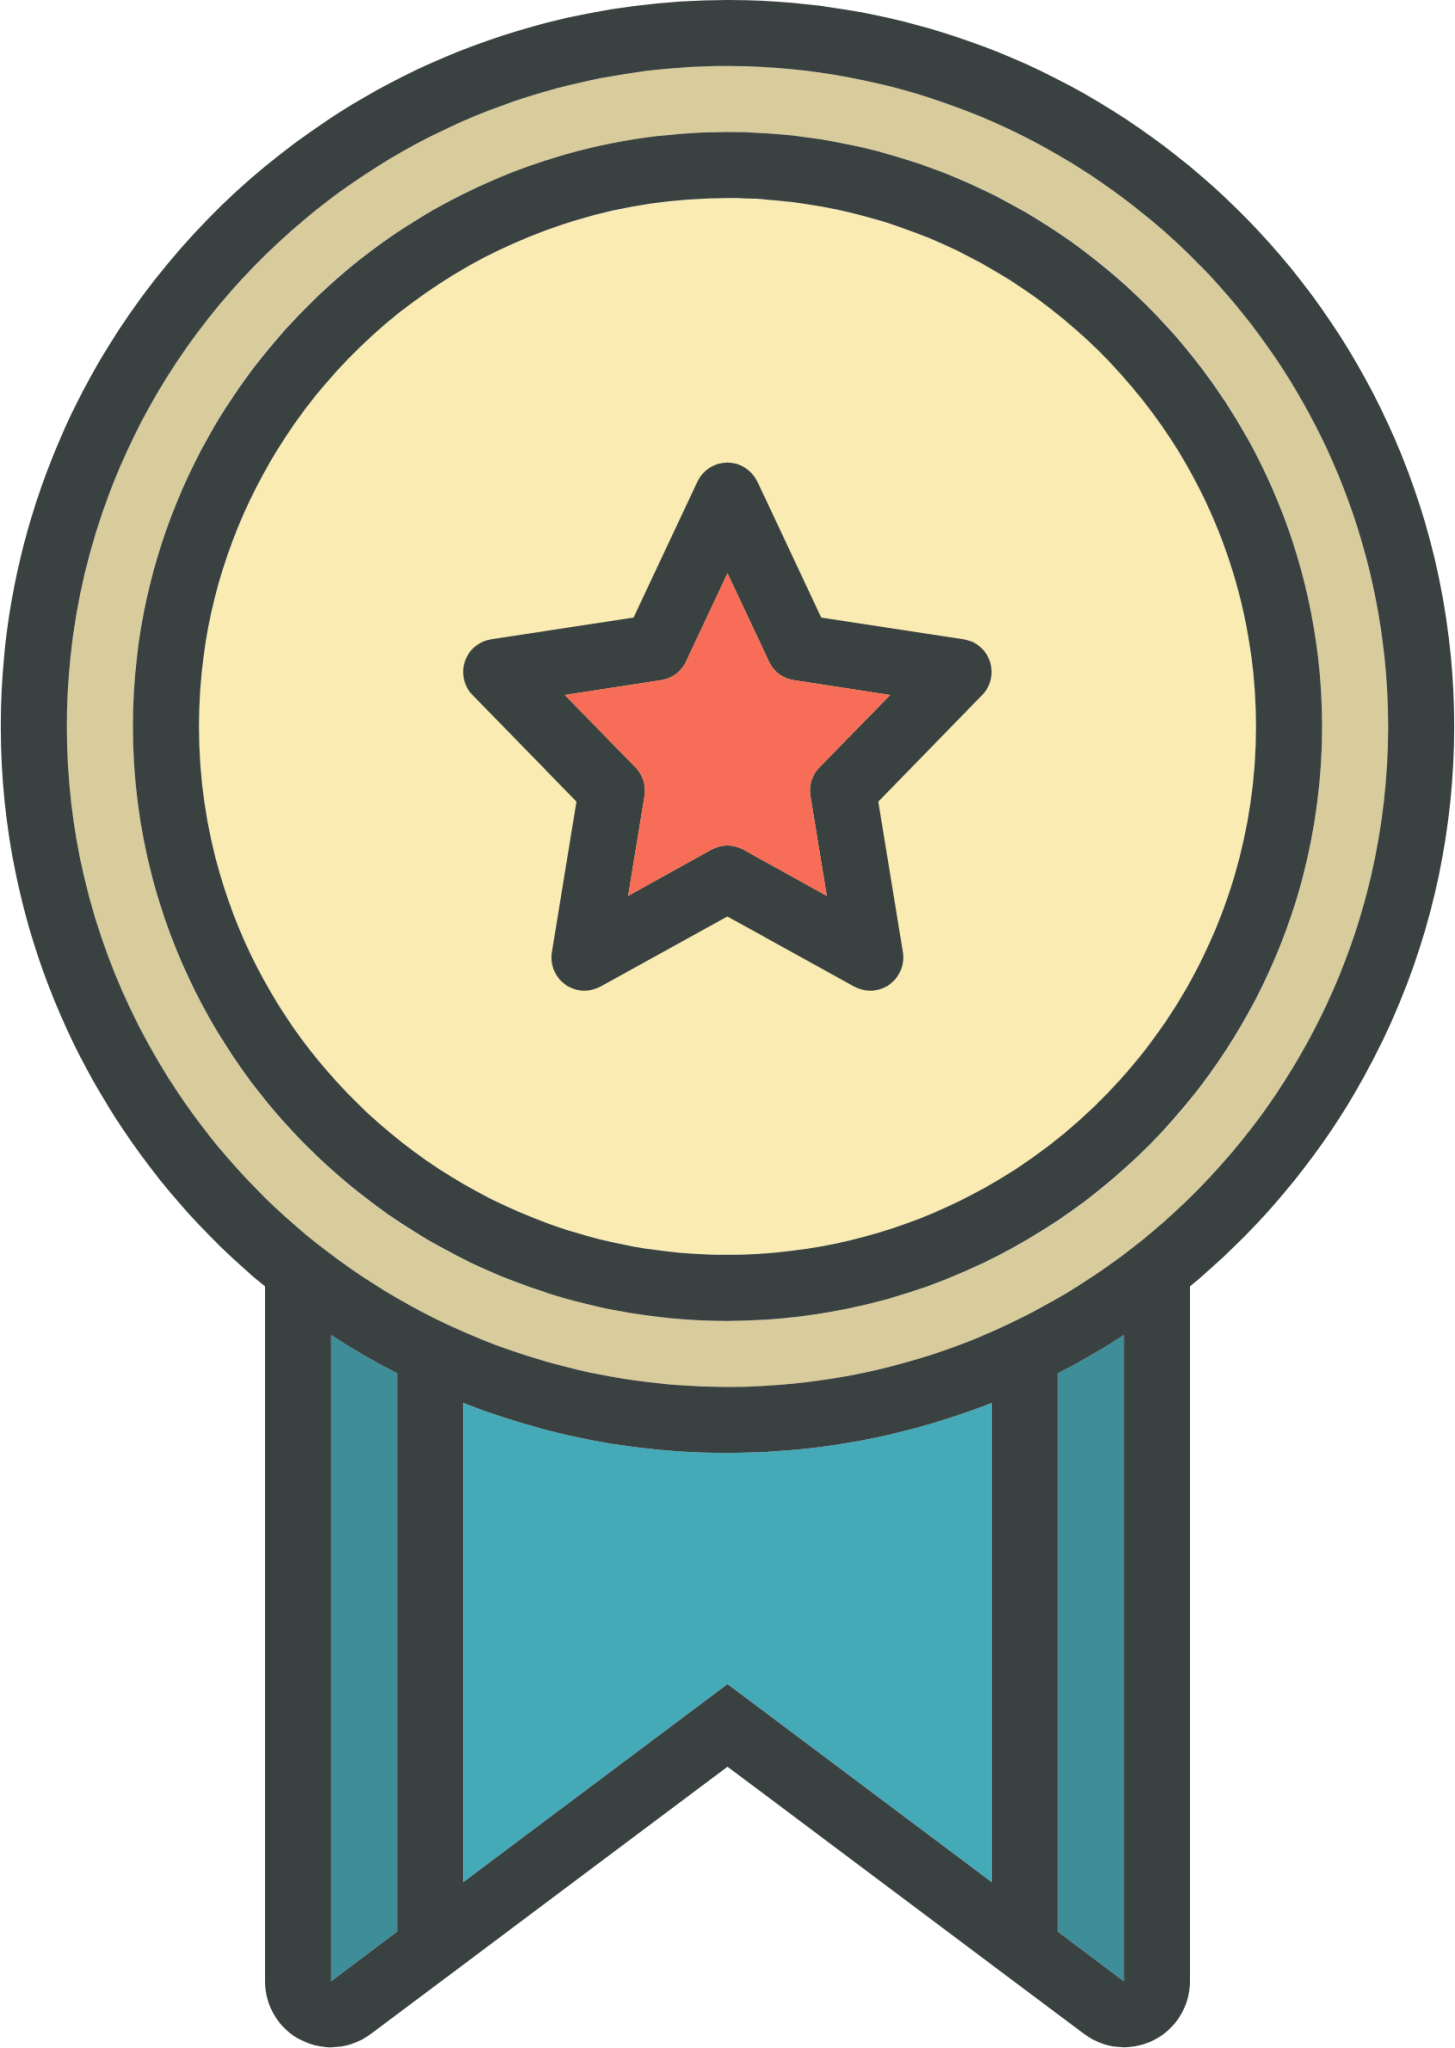 medal icon